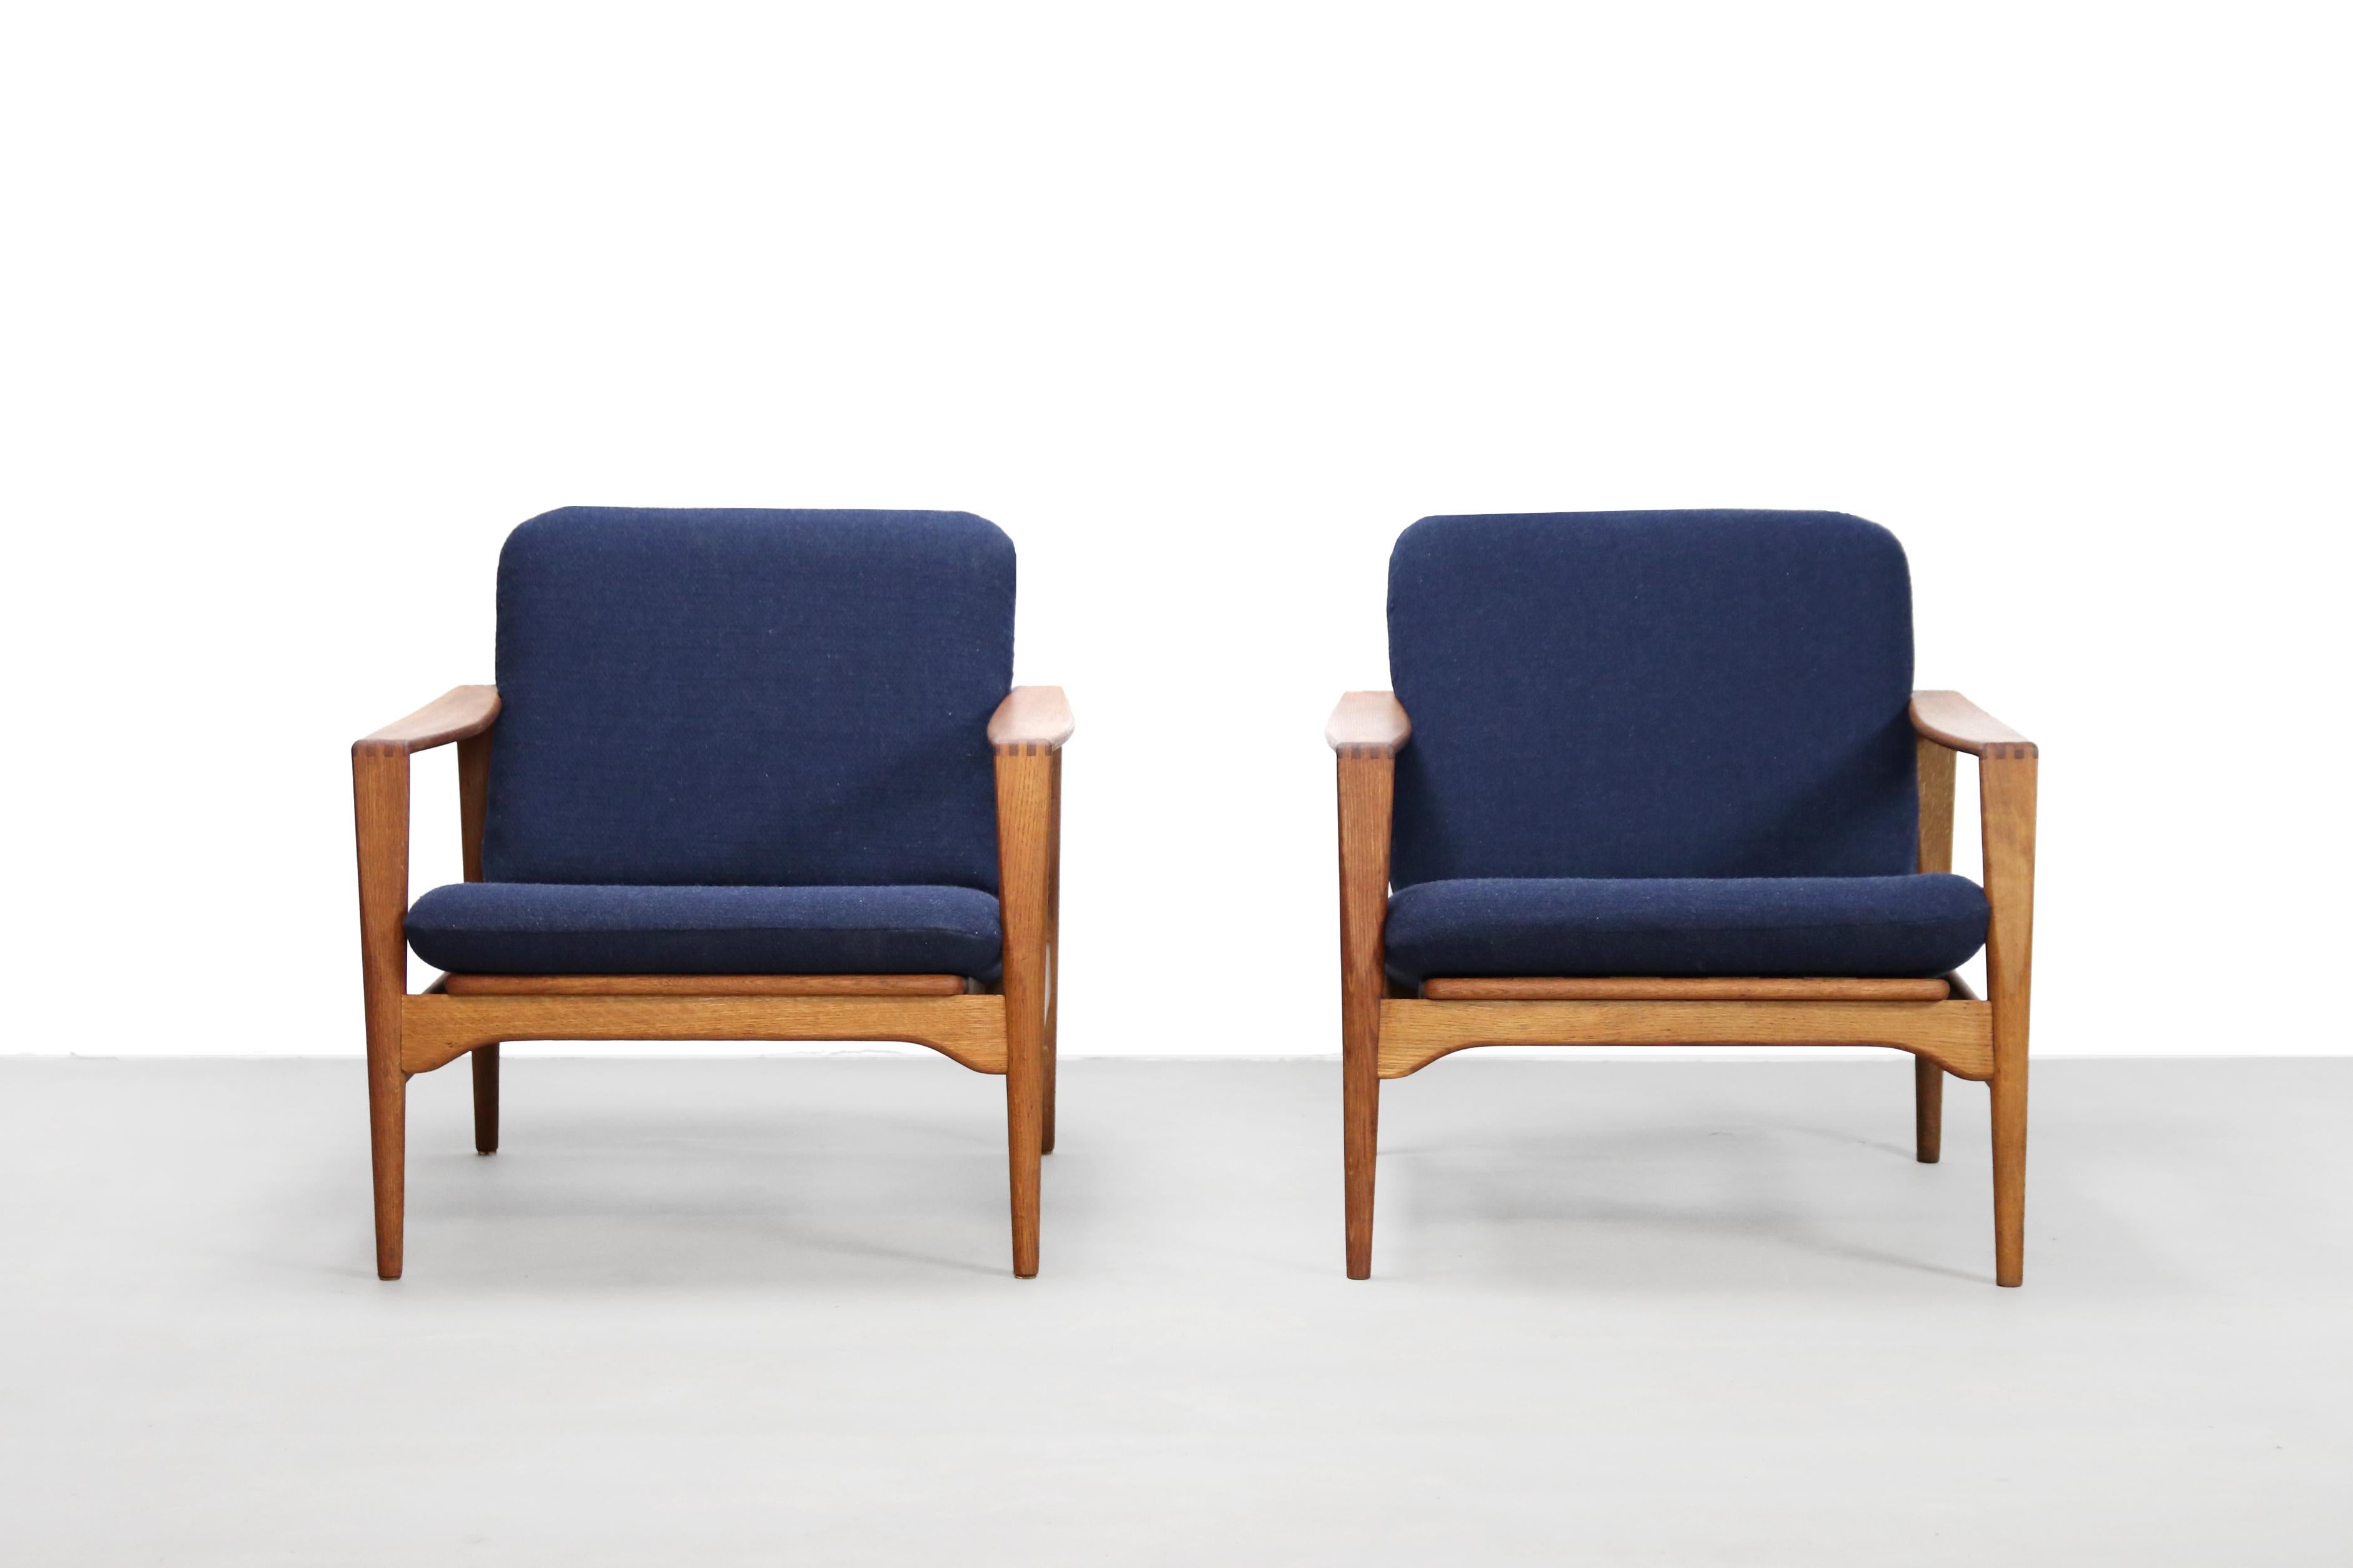 Beautiful set of vintage armchairs in solid oak. The armchairs are designed by Danish designer Illum Wikkelsø and produced by Niels Eilersen, Denmark in the 1960's. The frame is made of solid oak and has very nice details such as the wood connection